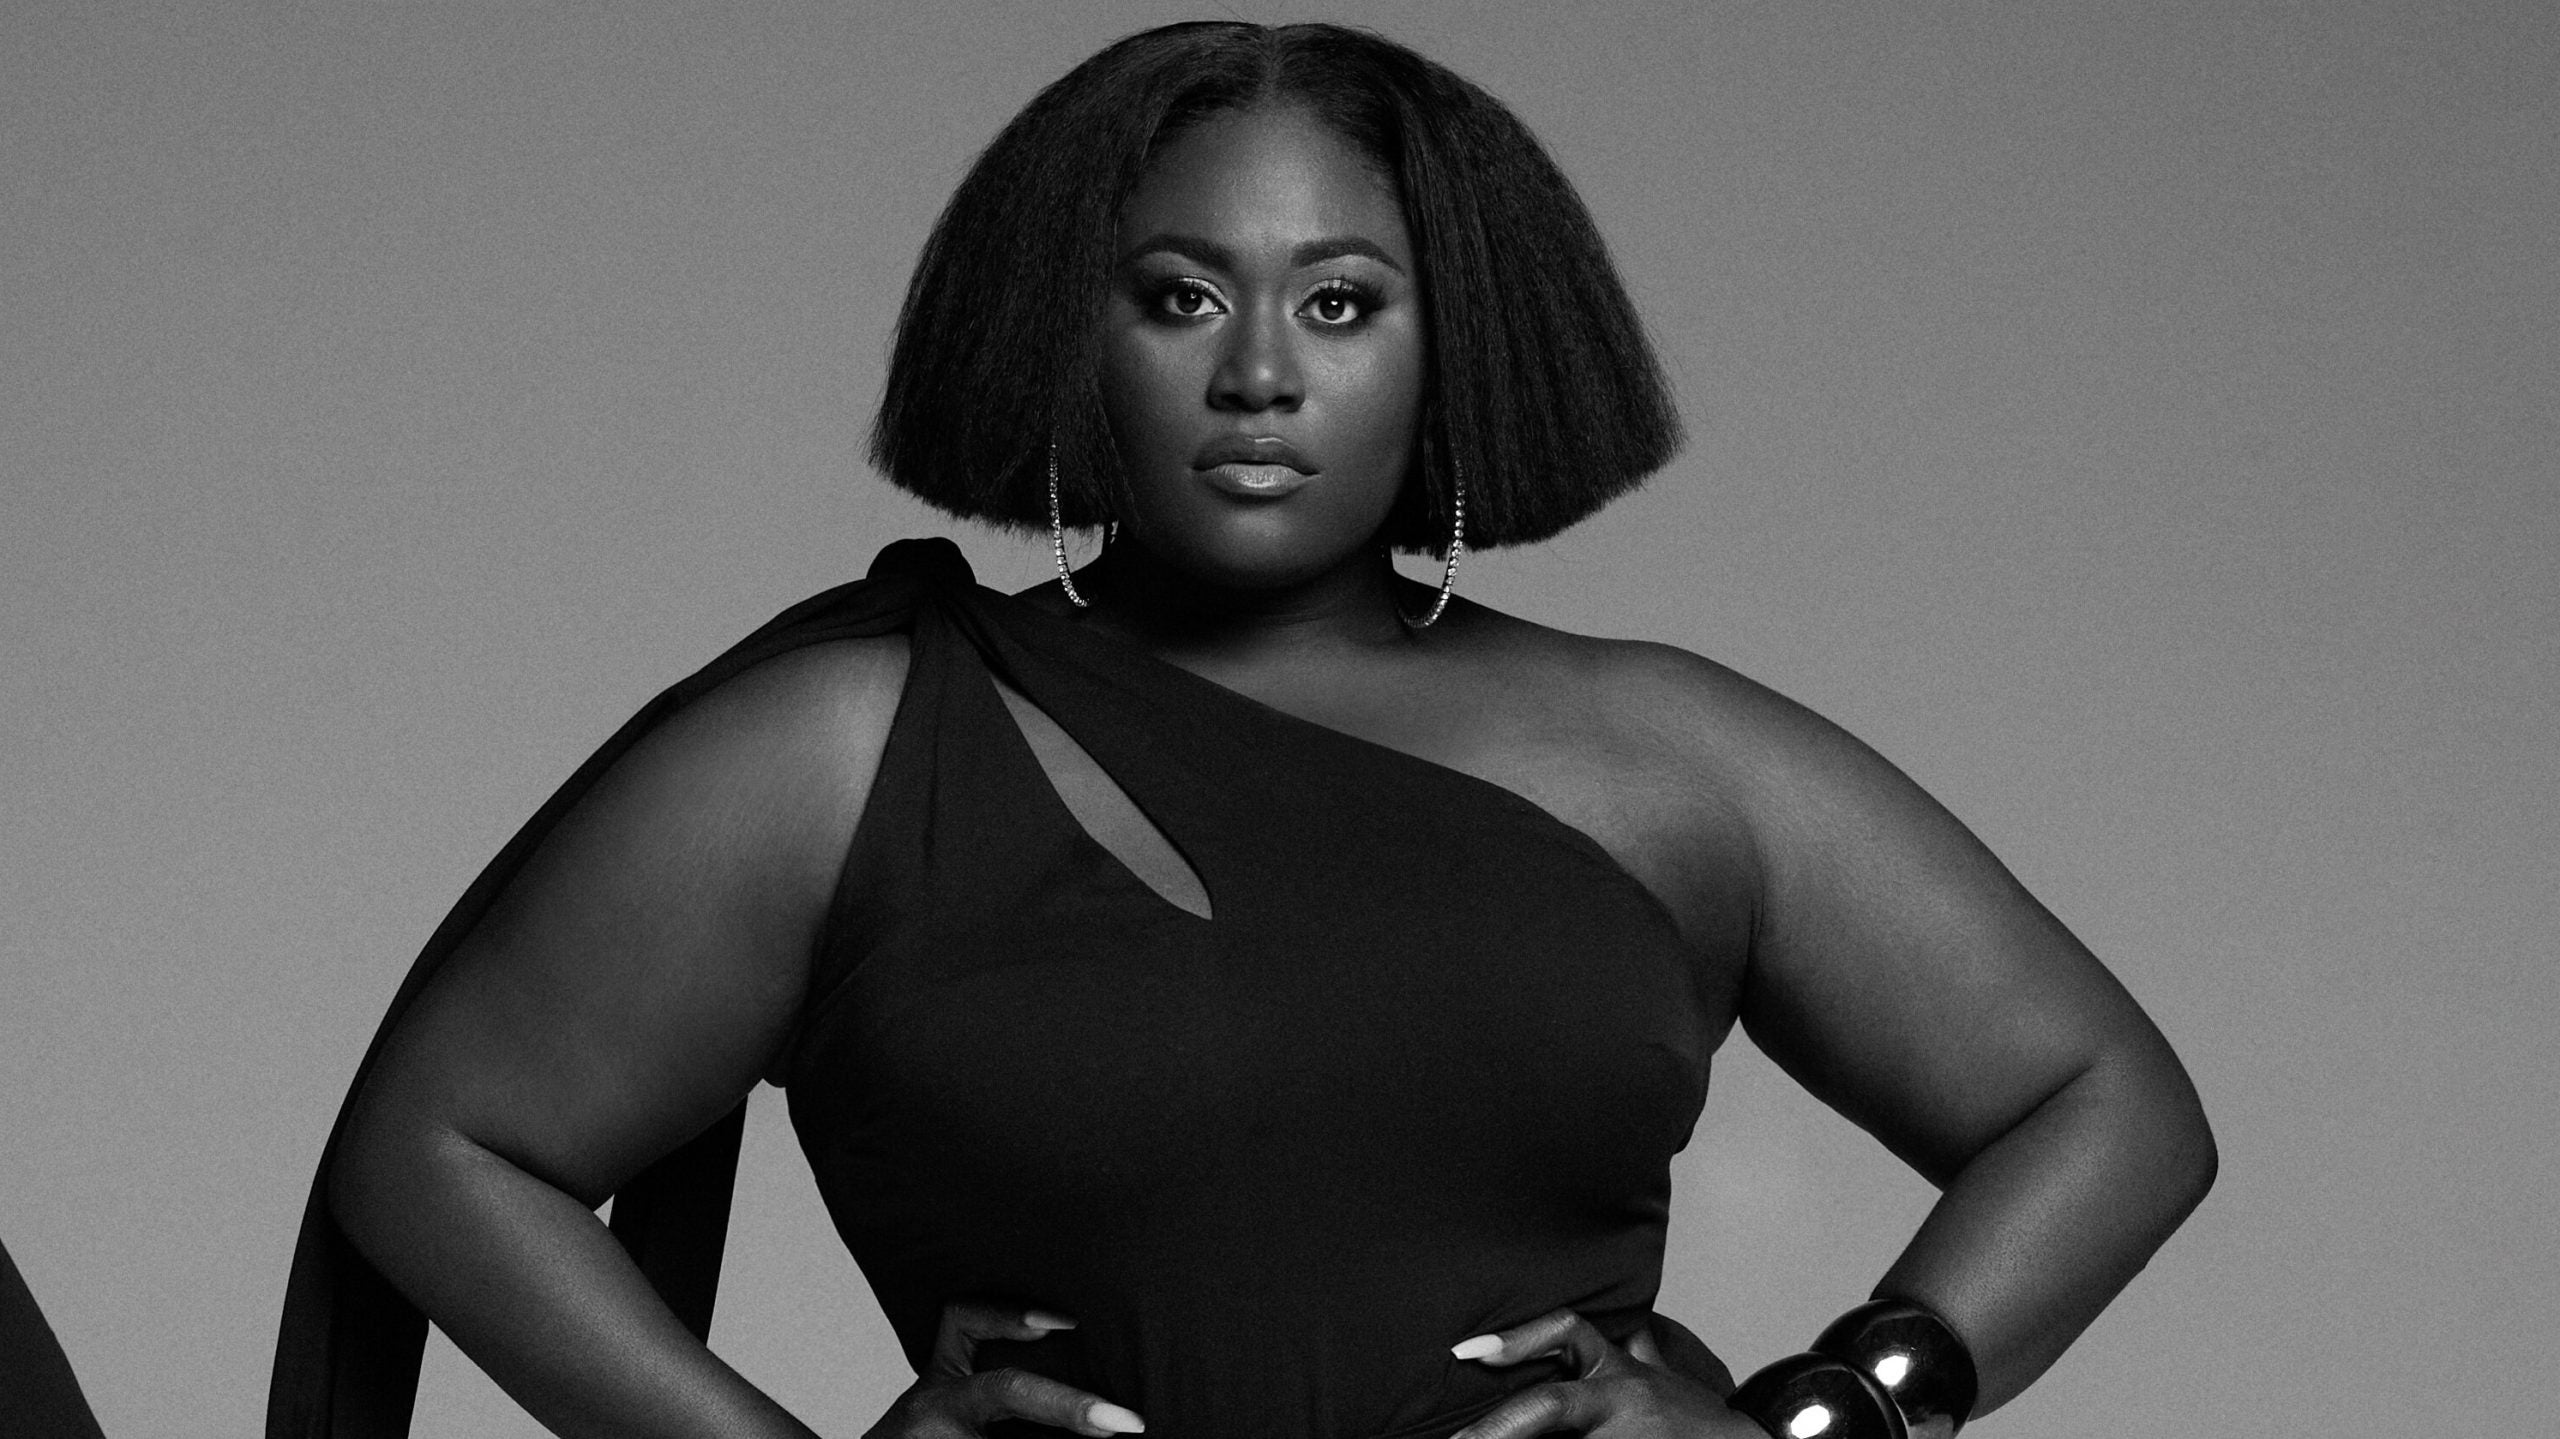 EXCLUSIVE: 11 Honoré And Danielle Brooks On Teaming Up For Their New Luxurious, Plus-Size Collection